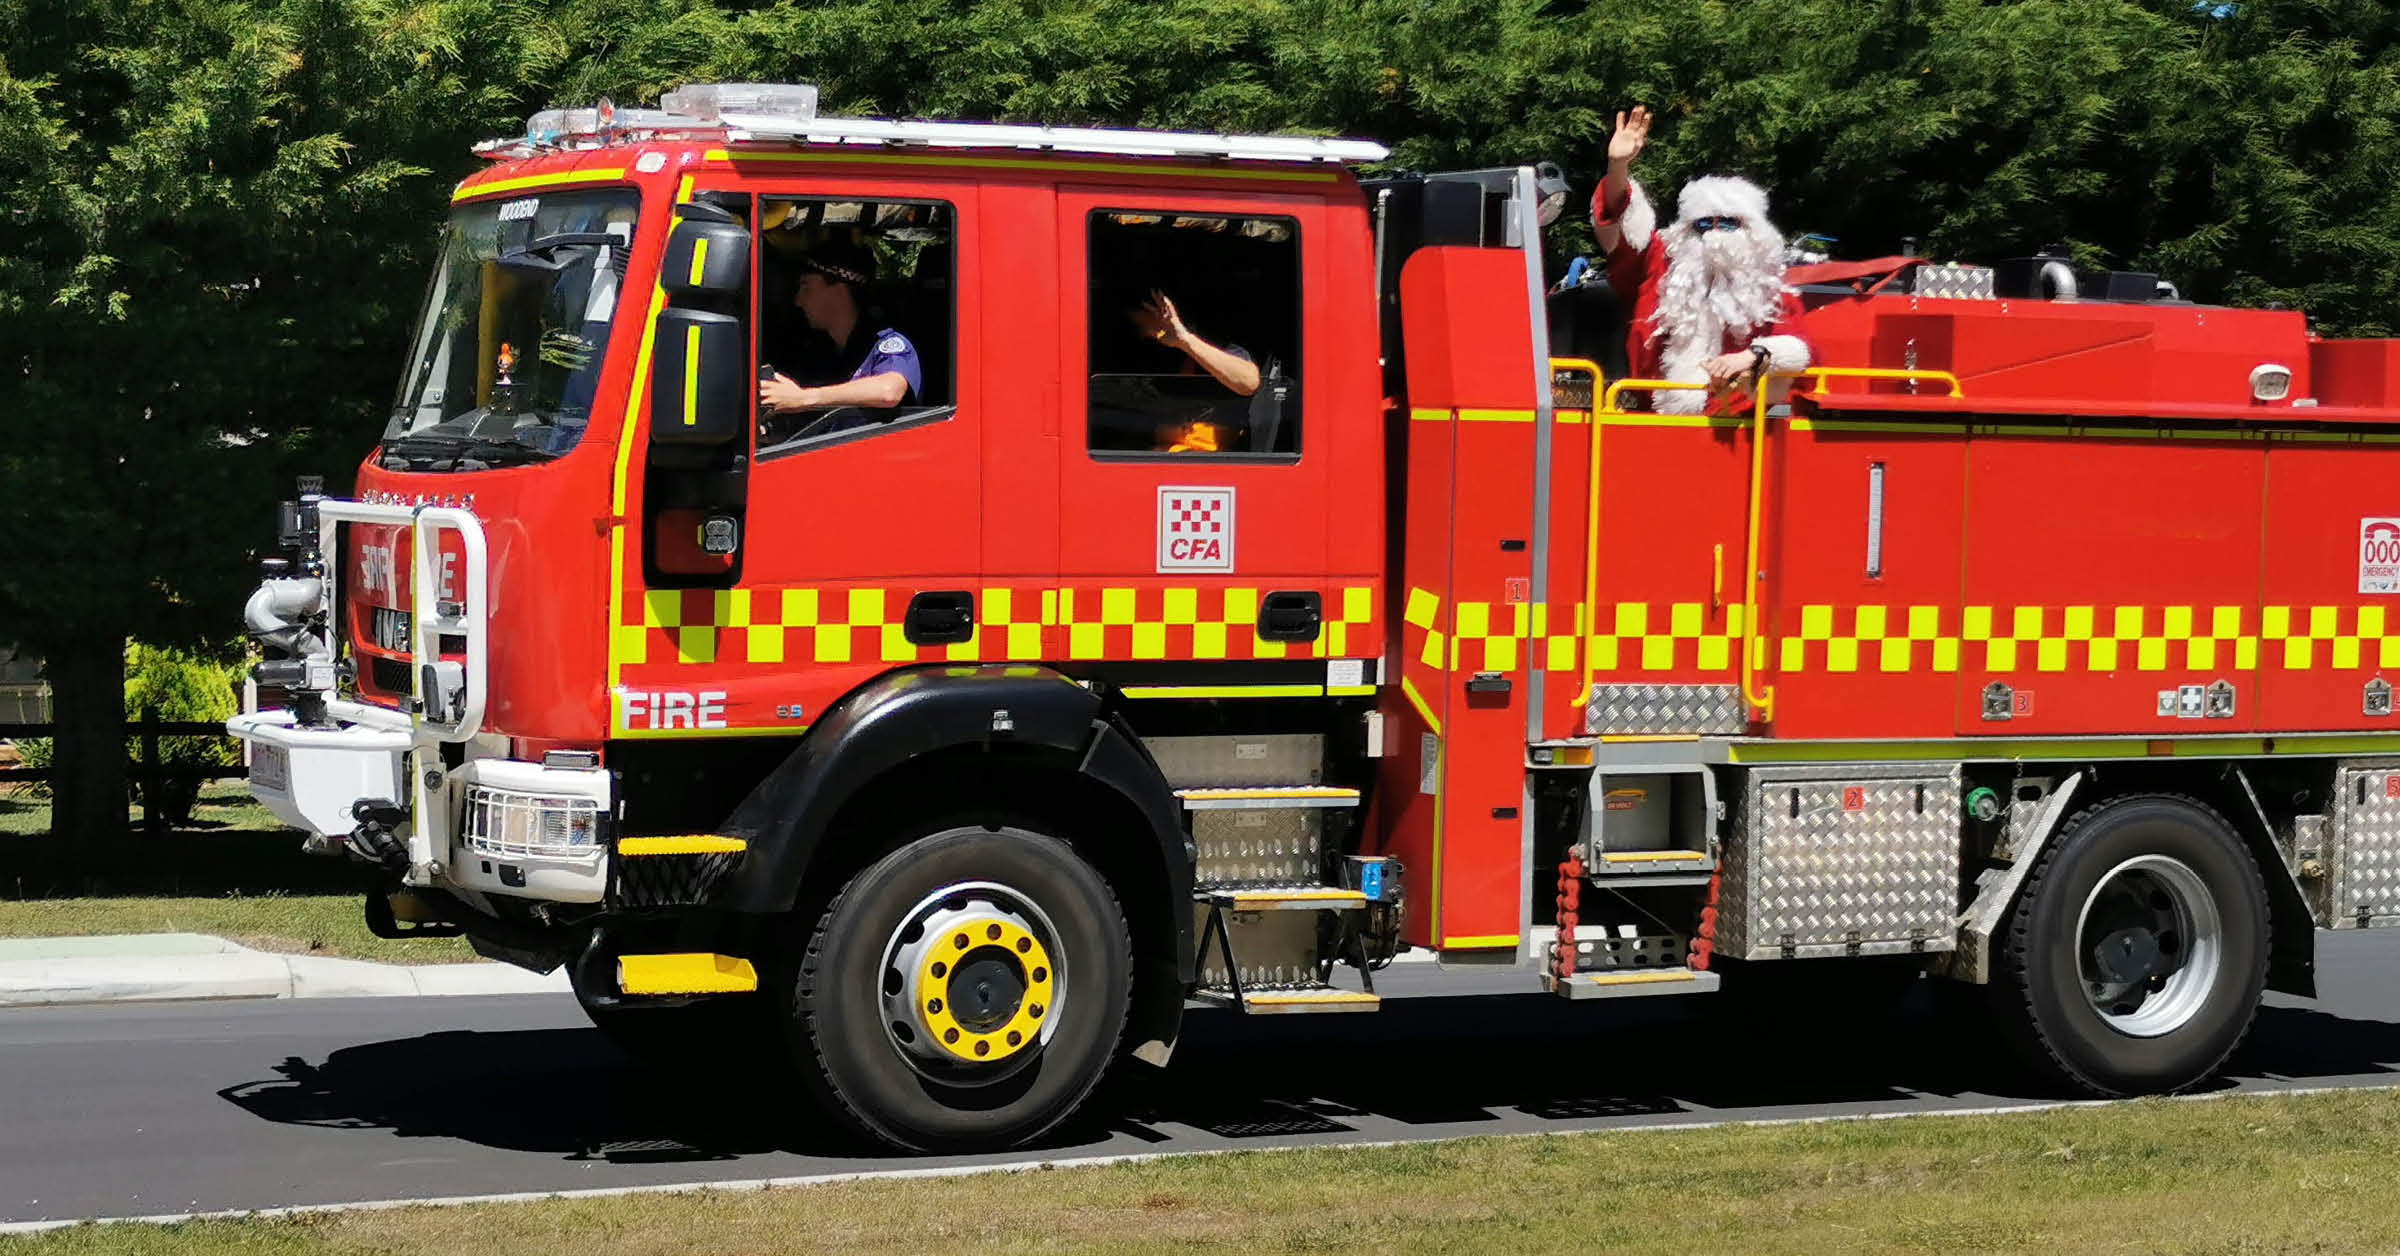 Santa waves from the back of a CFA fire truck.